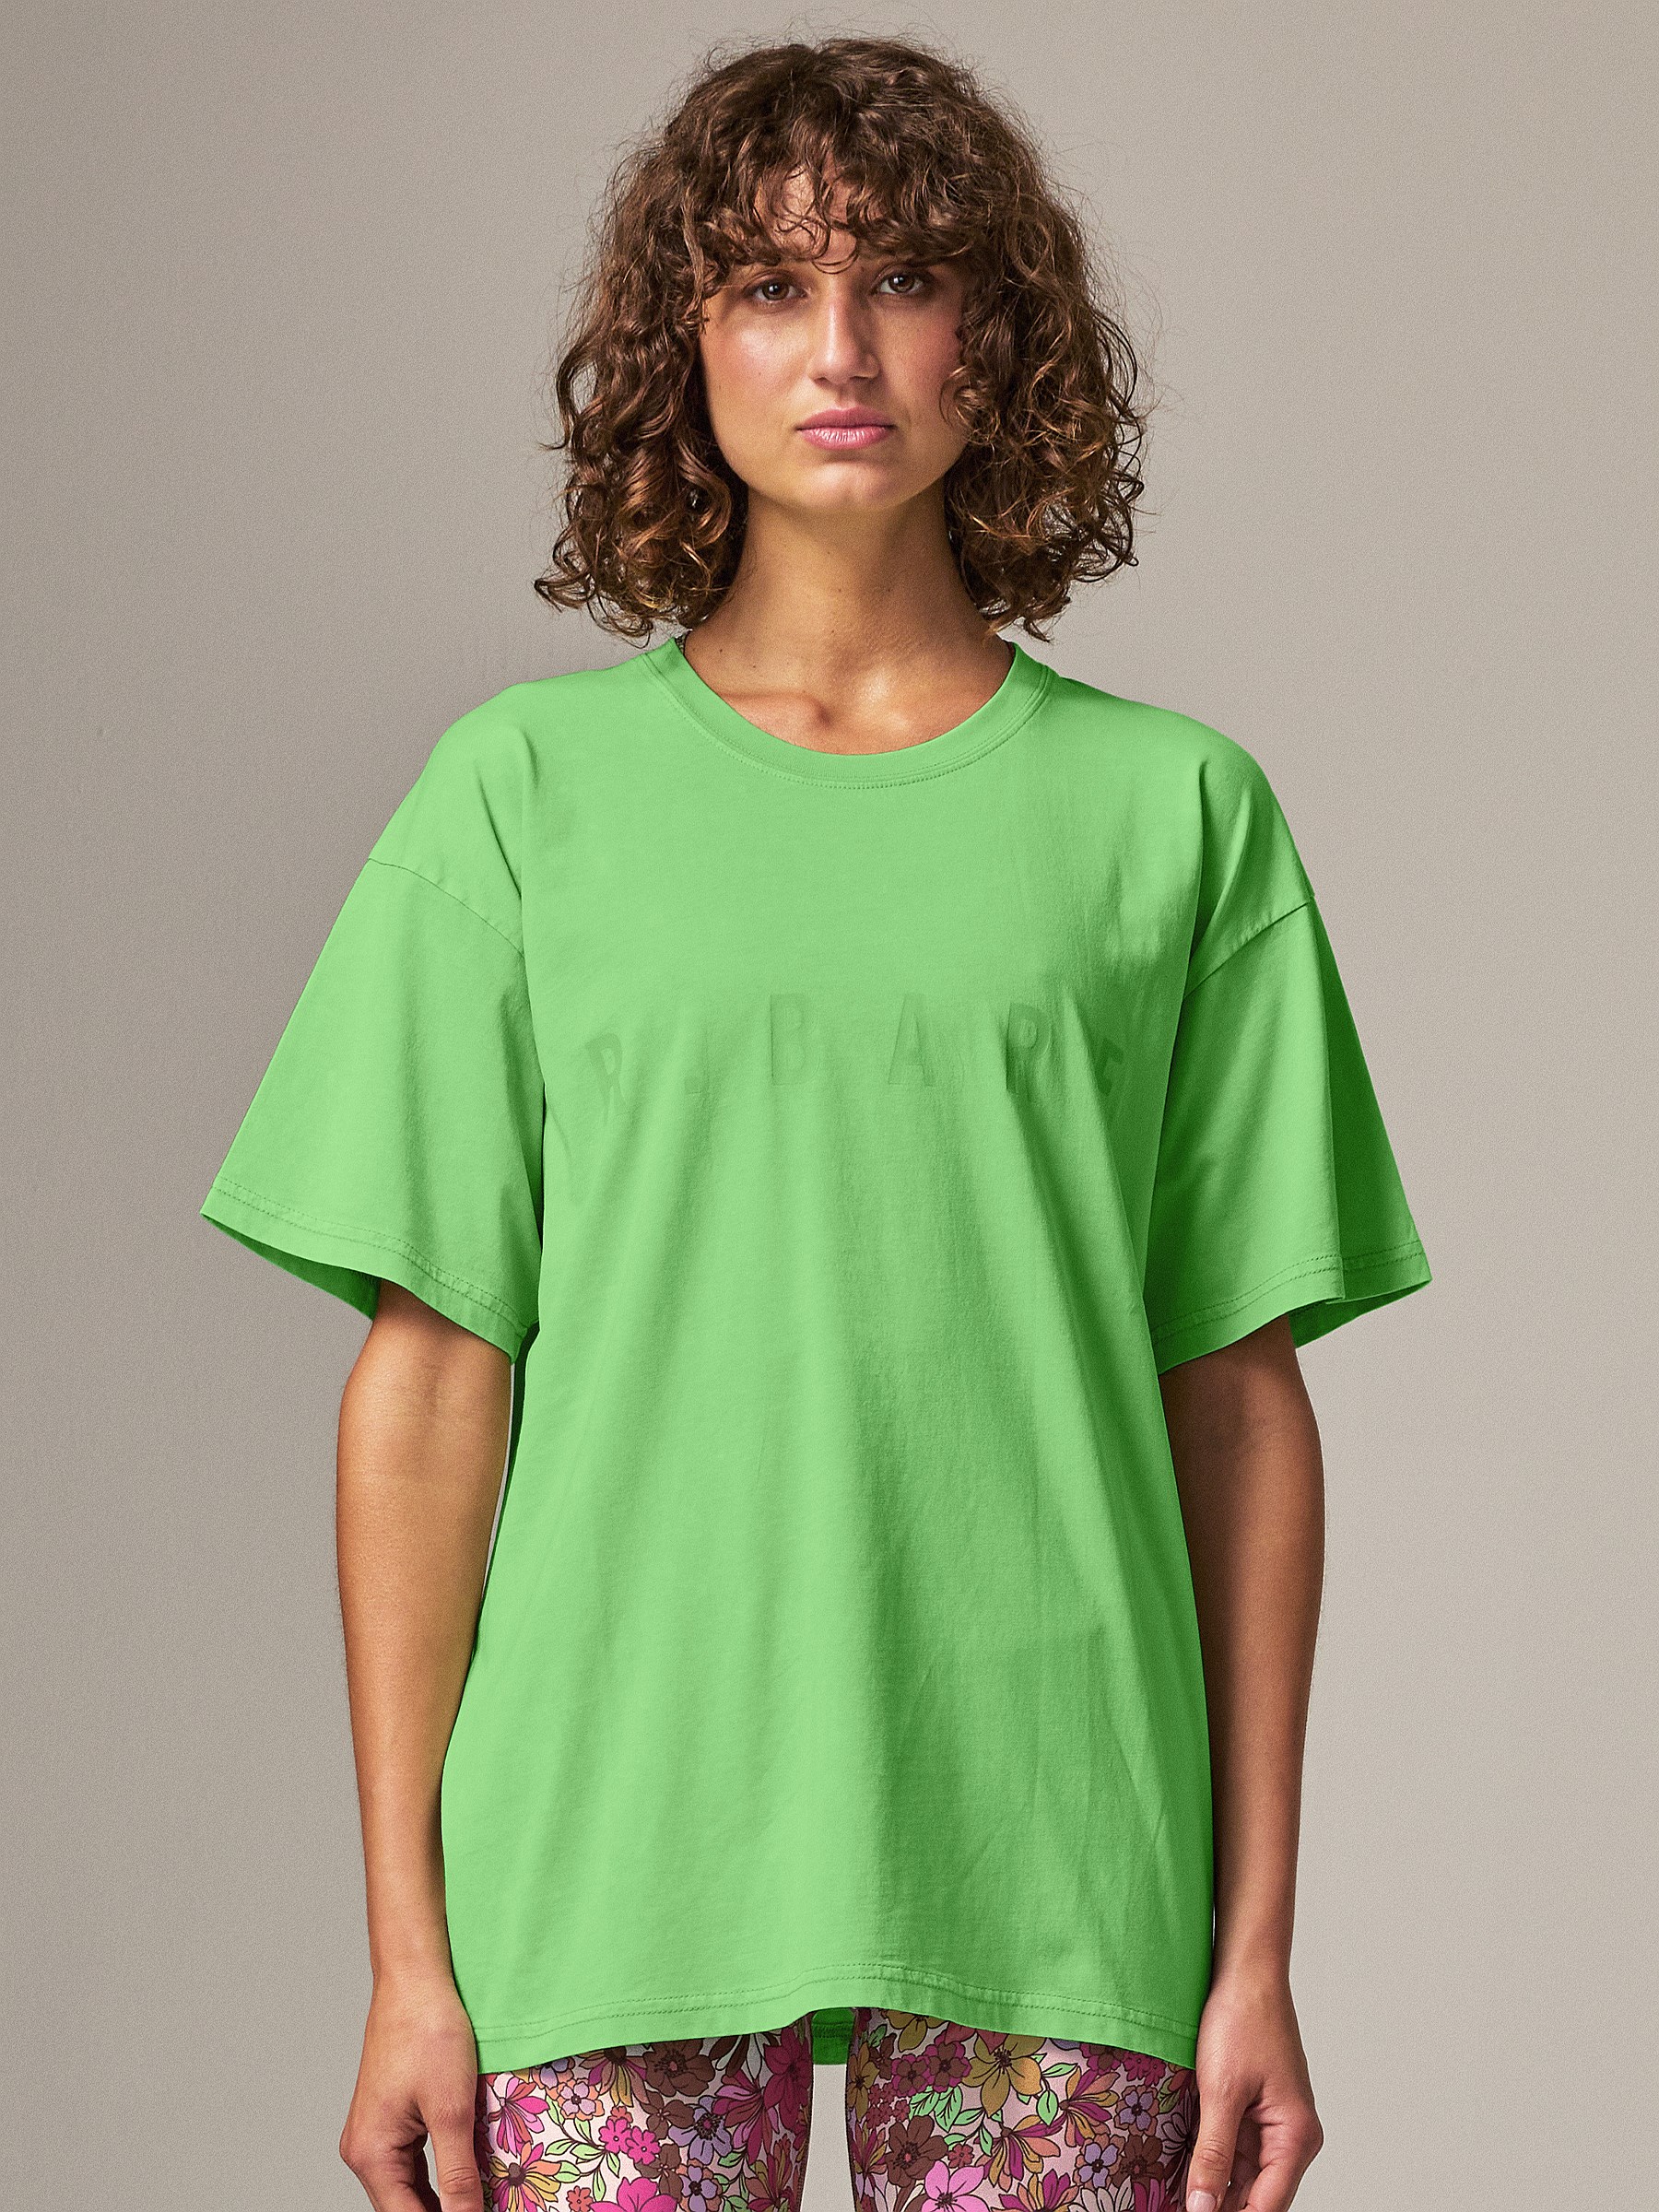 Running Bare Hollywood 90s Tee. Shop Oversized T-Shirts - Green.